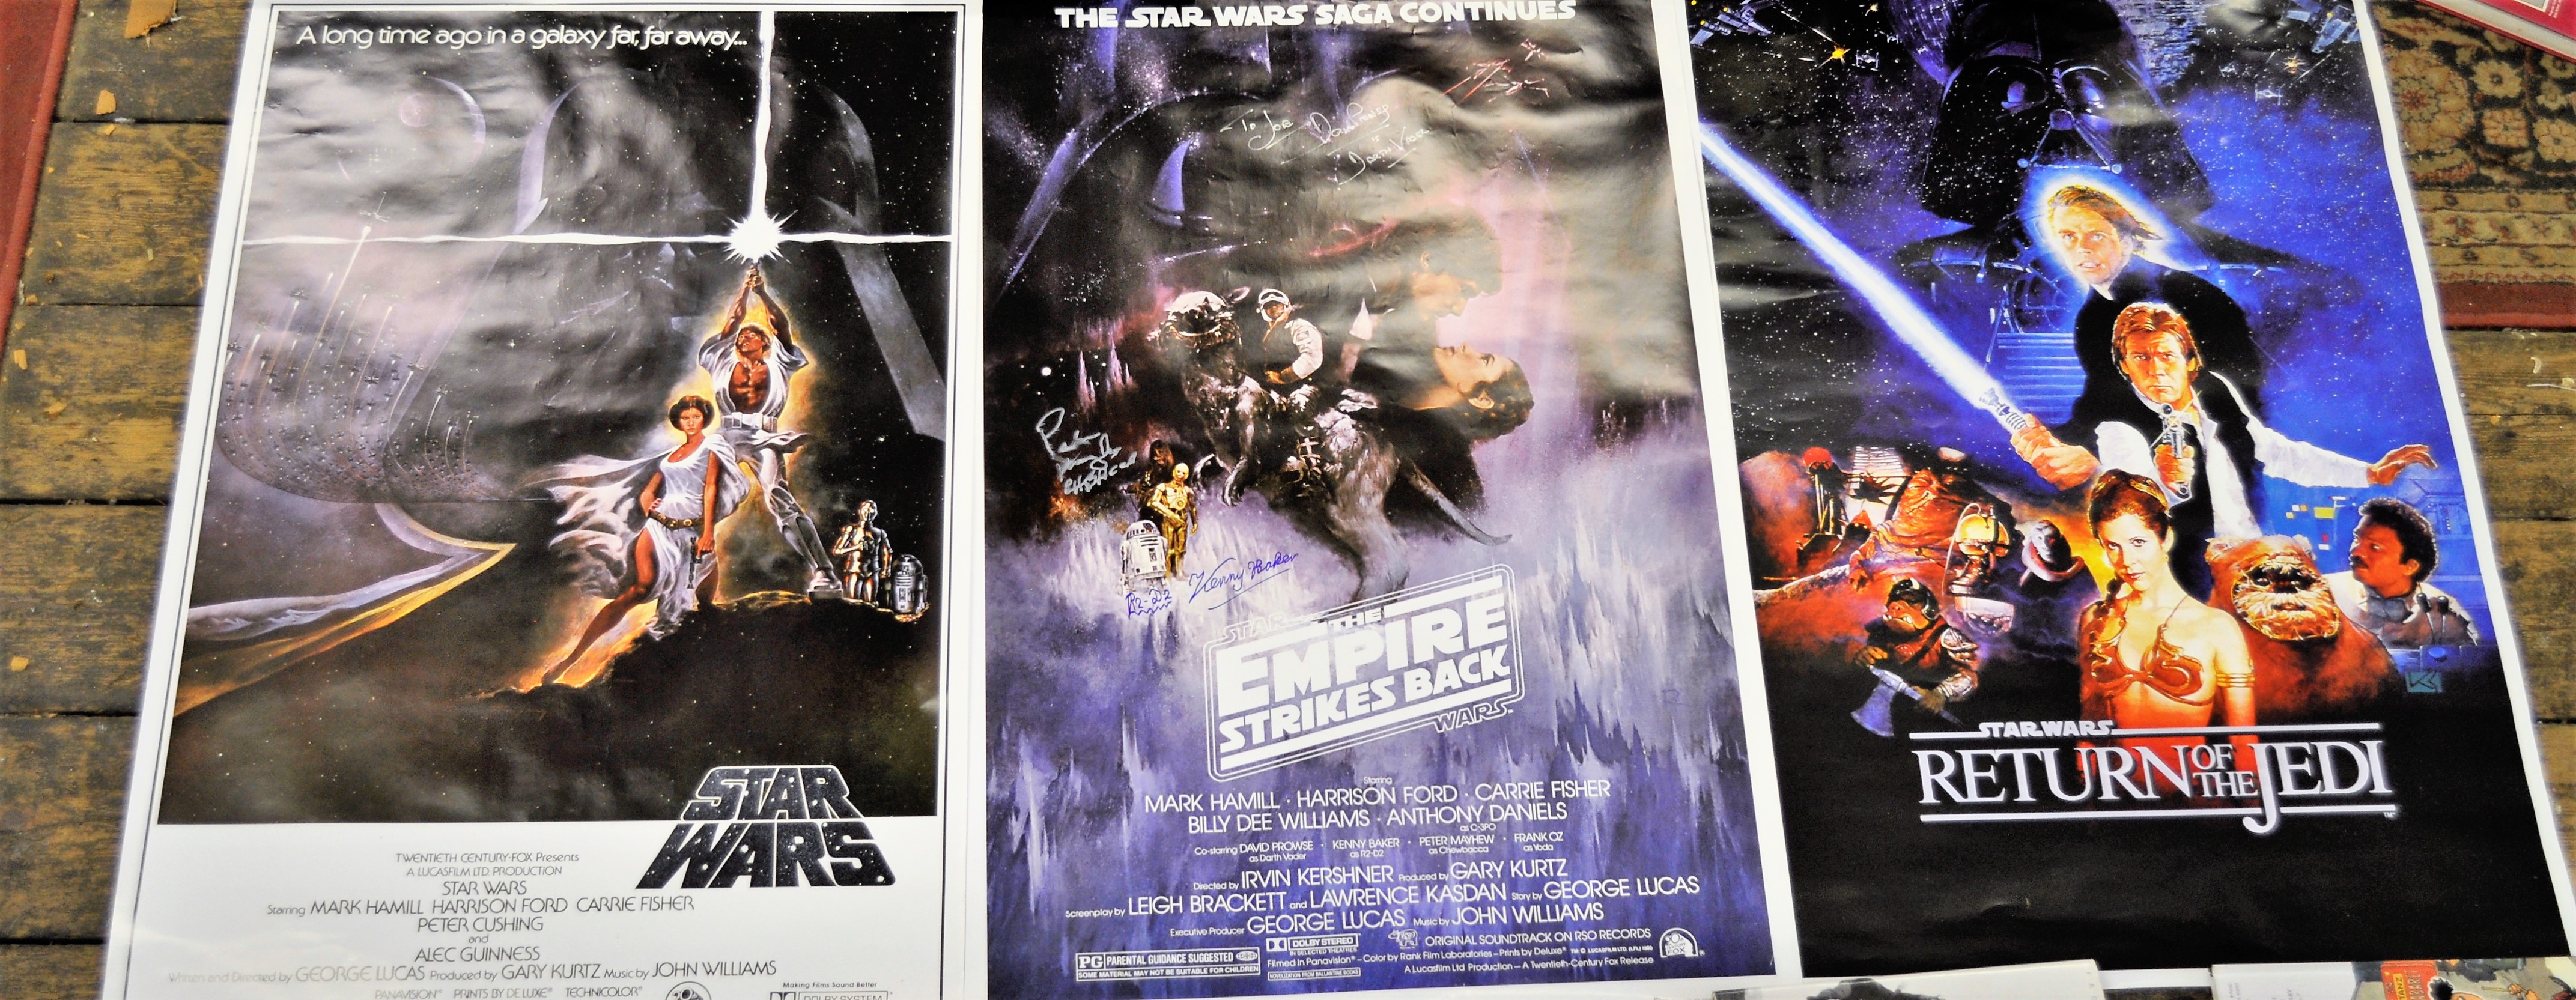 *Star Wars - three movie posters for A New Hope, The Empire Strikes Back and Return of the Jedi, The